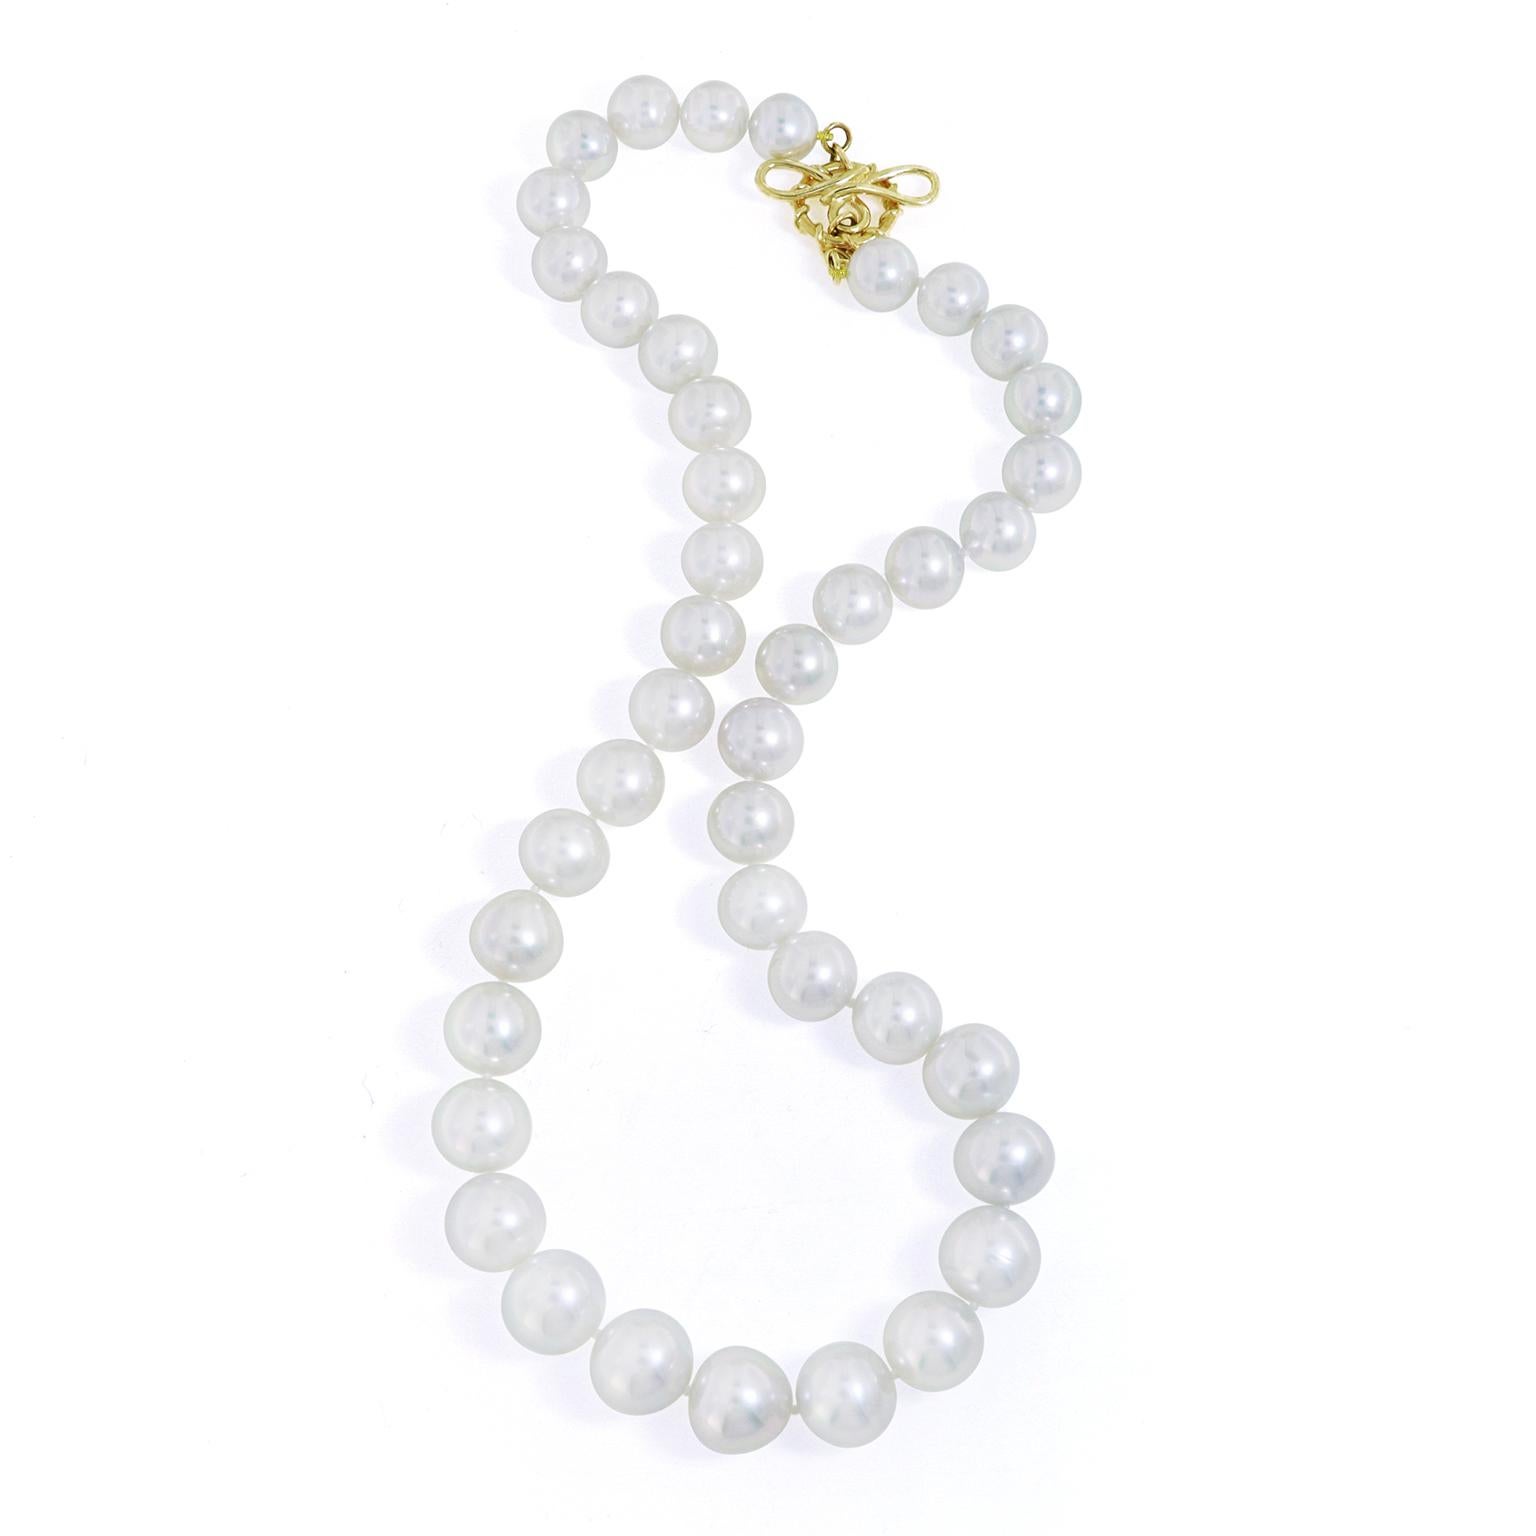 Lustrous radiance encompasses this elegant pearl necklace. 41 round South Sea pearls are strung together with a small knot in between each to ensure protection. The pearls gradually become more prominent in the center of the arrangement and descend